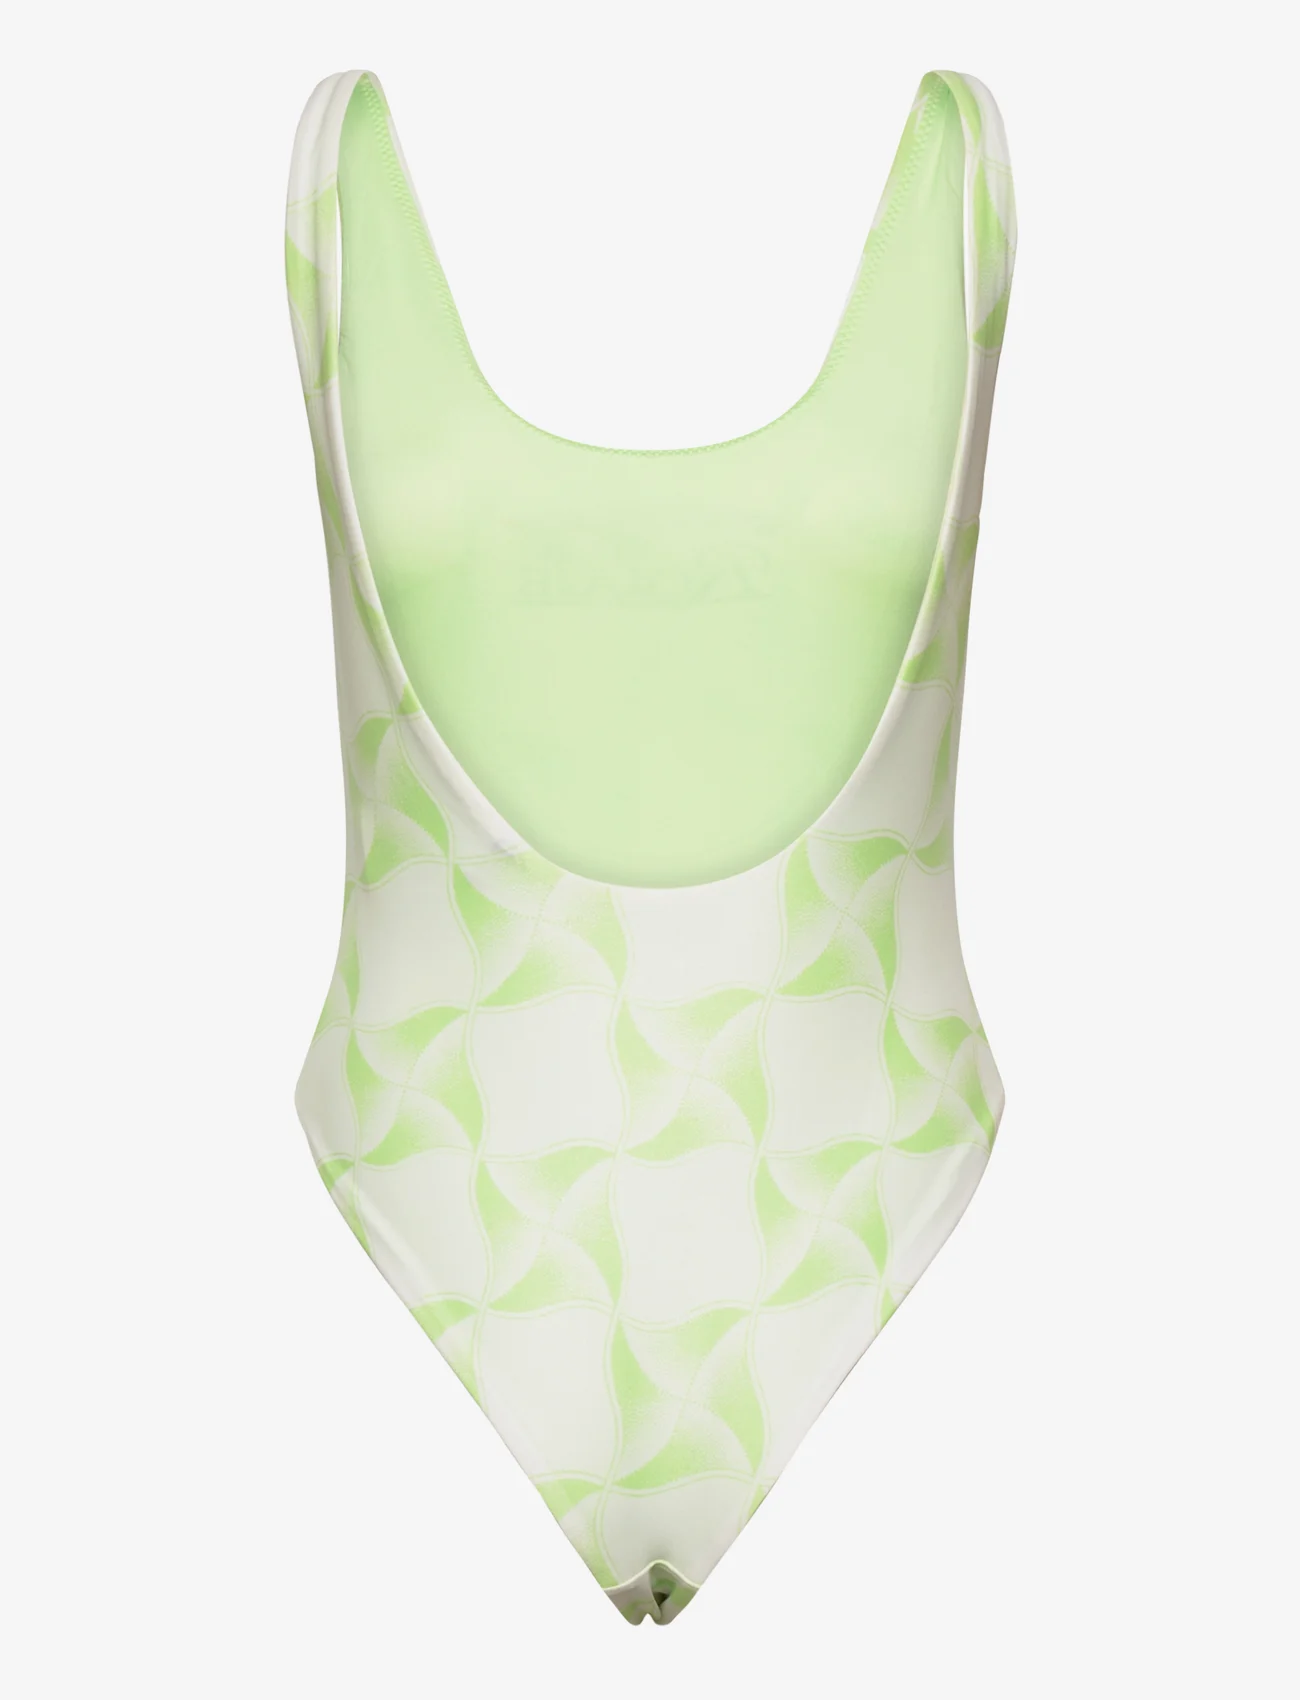 ROTATE Birger Christensen - Cismione Bathing Suit - badedragter - paradise green comb. - 1